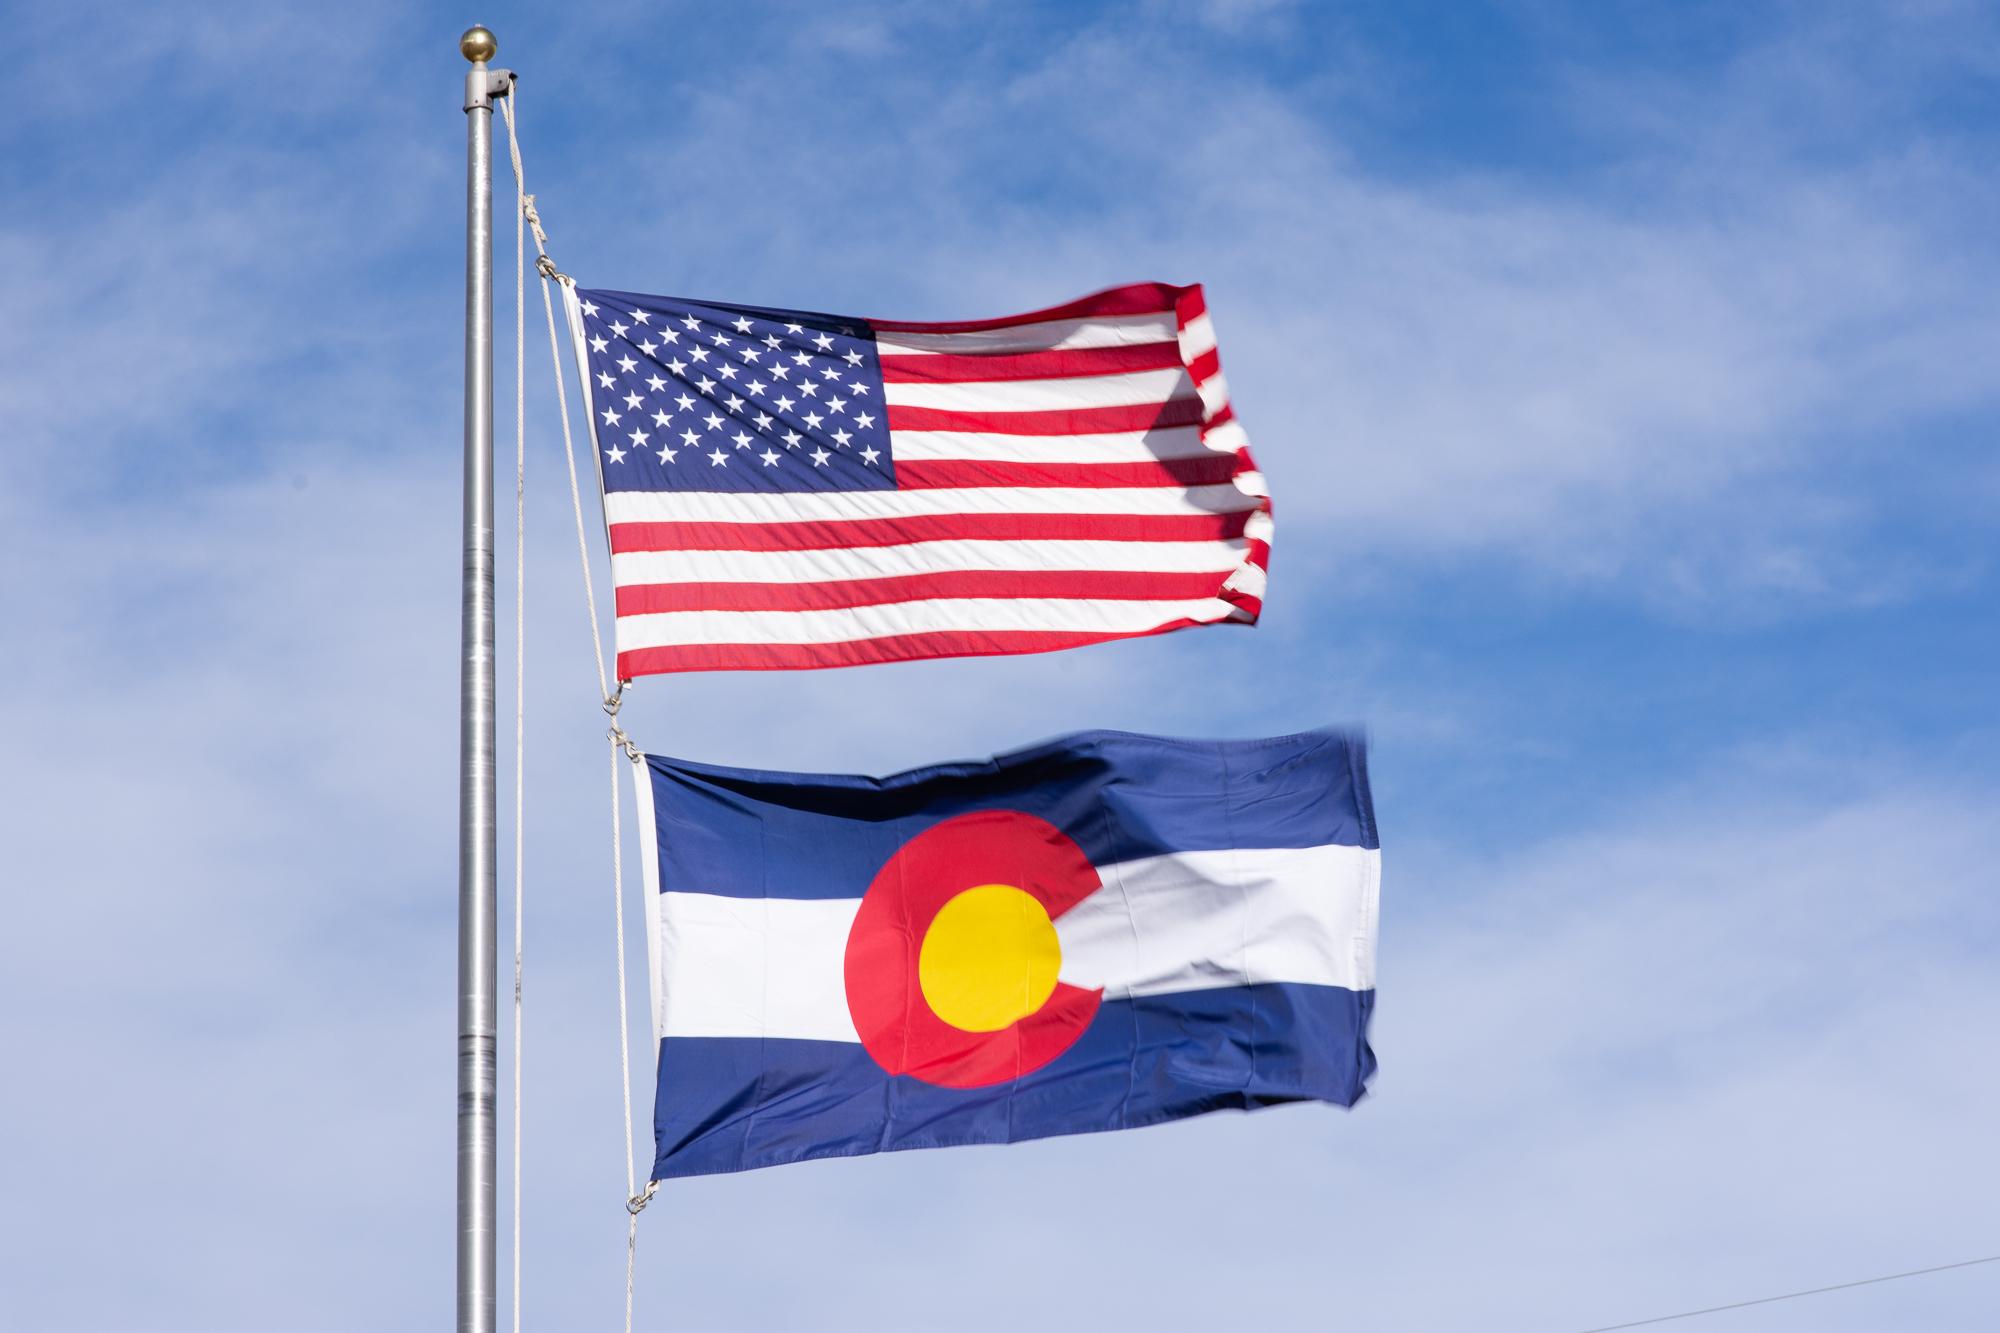 Wind-Gusts-Flags-Westminster-Colorado-230220